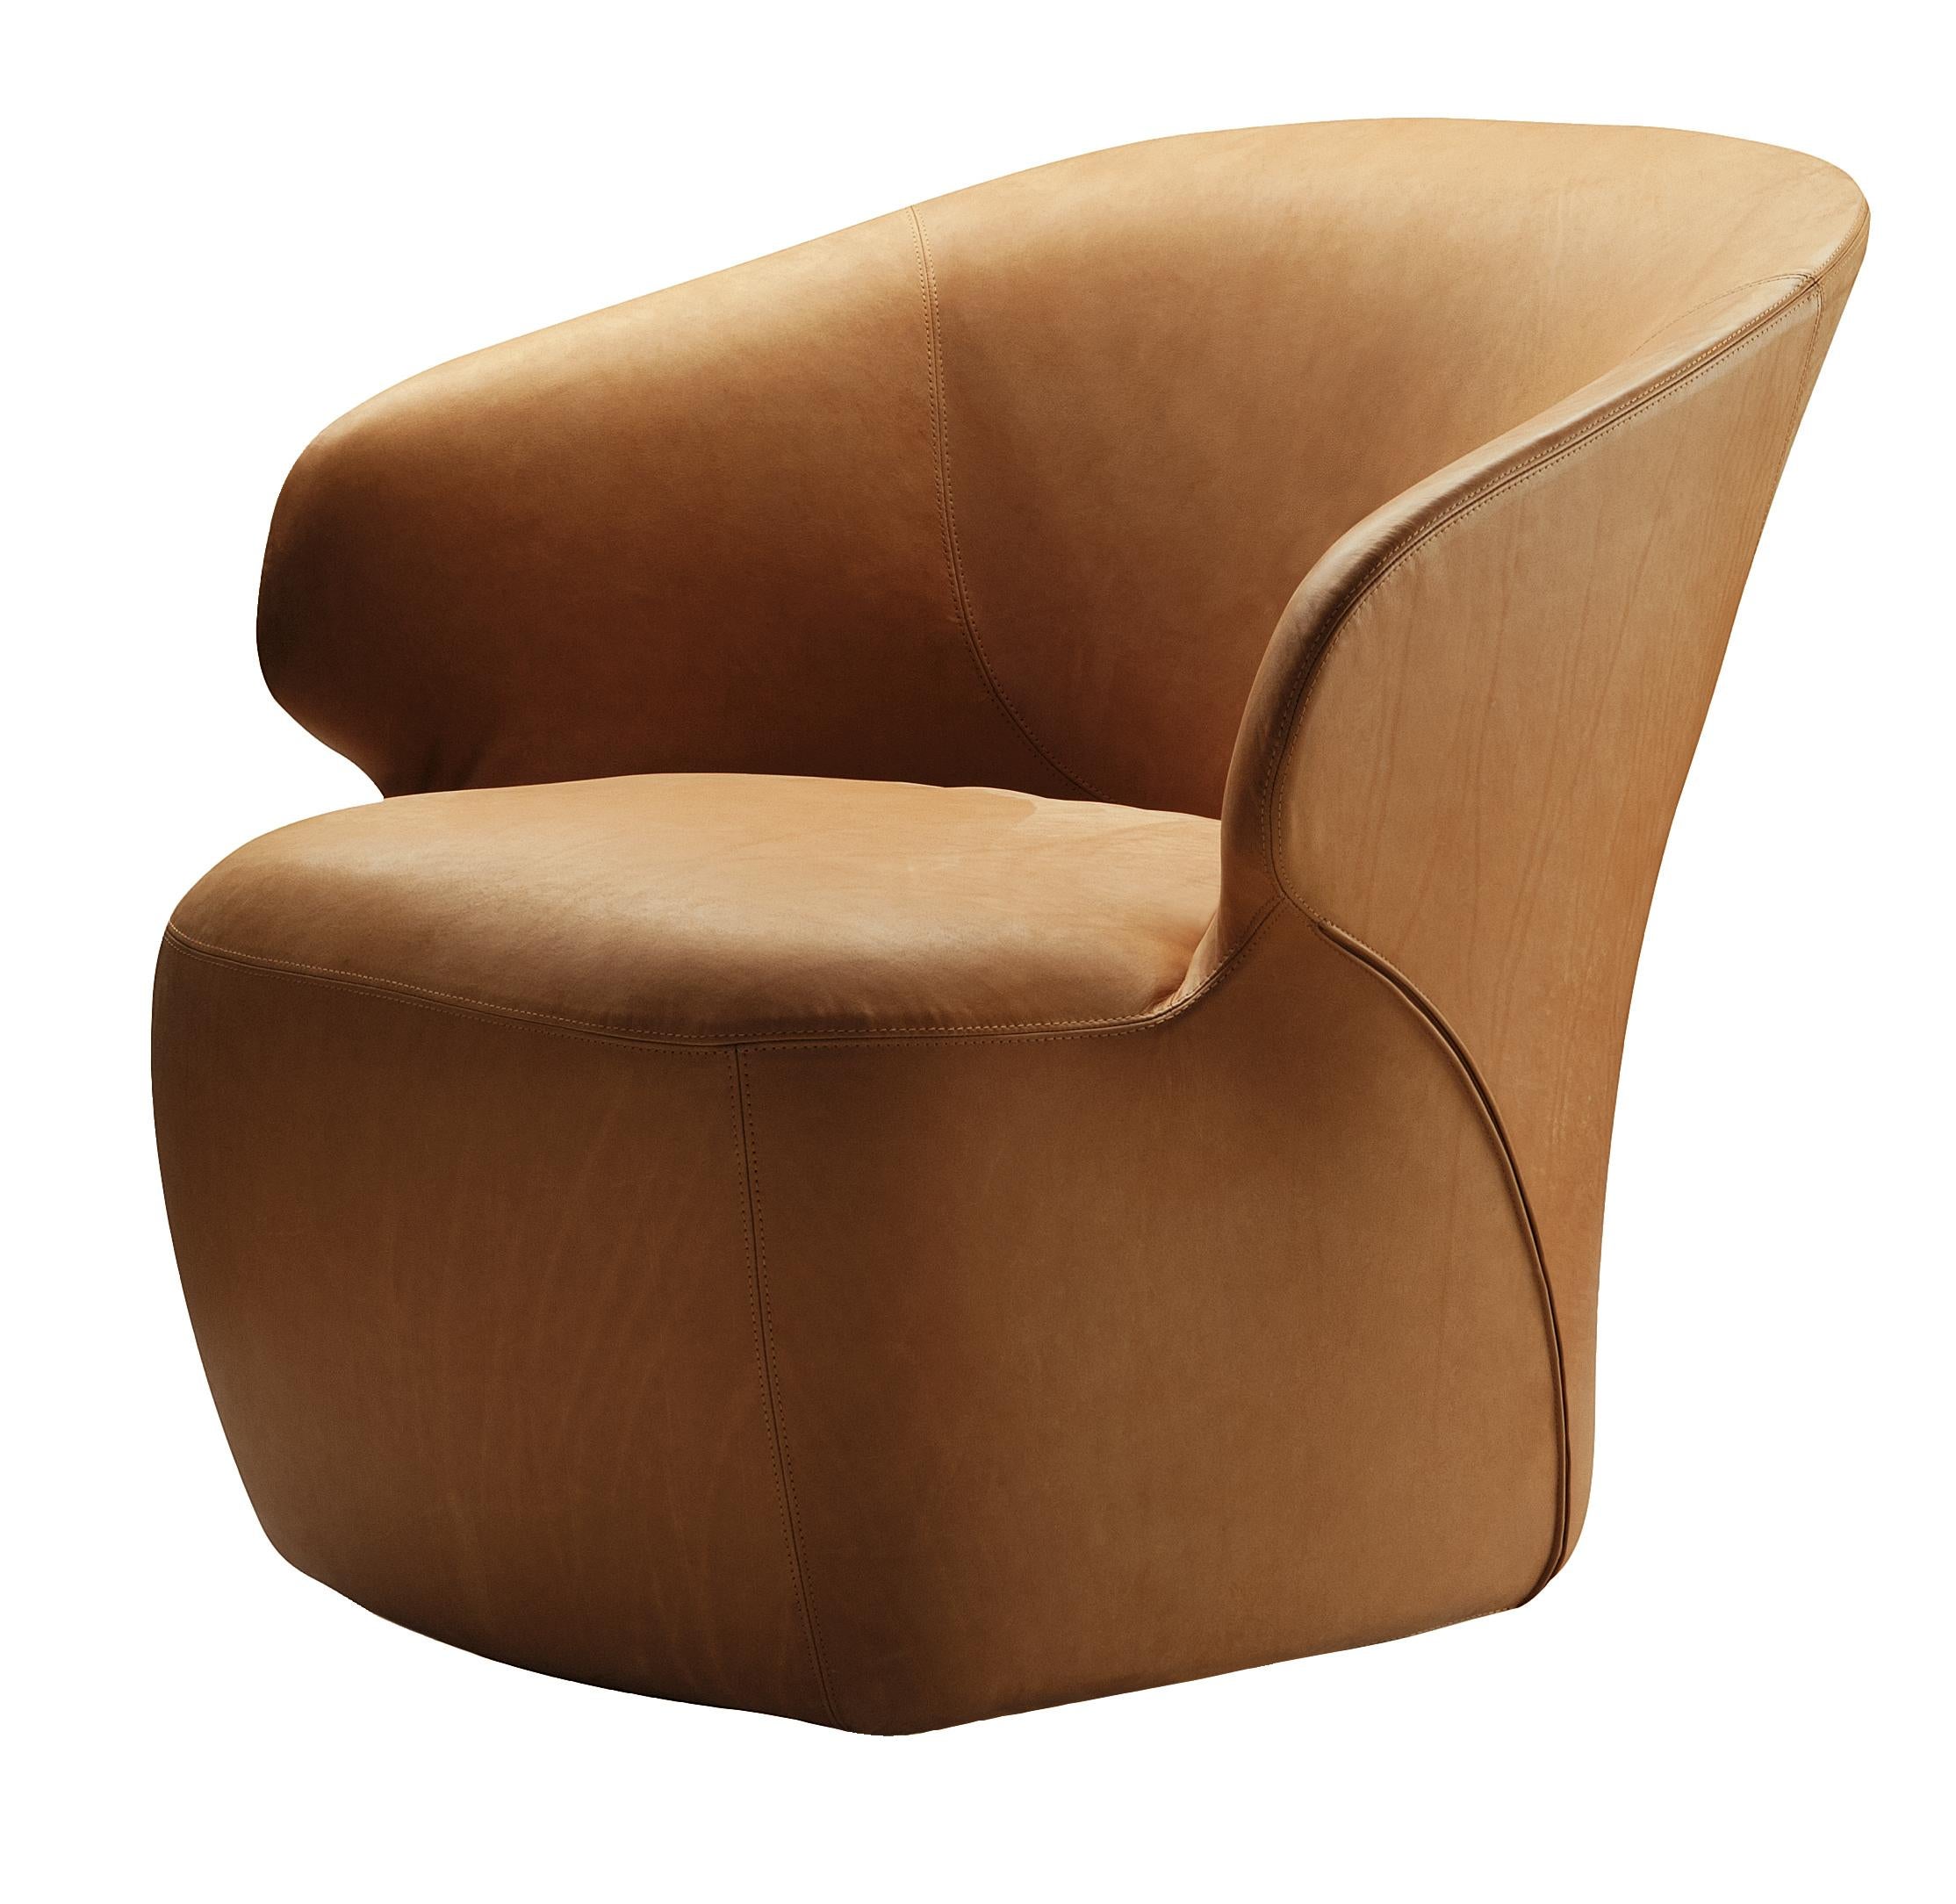 Leather Customizable Zanotta Arom Chair Designed by Noé Duchaufour Lawrance For Sale